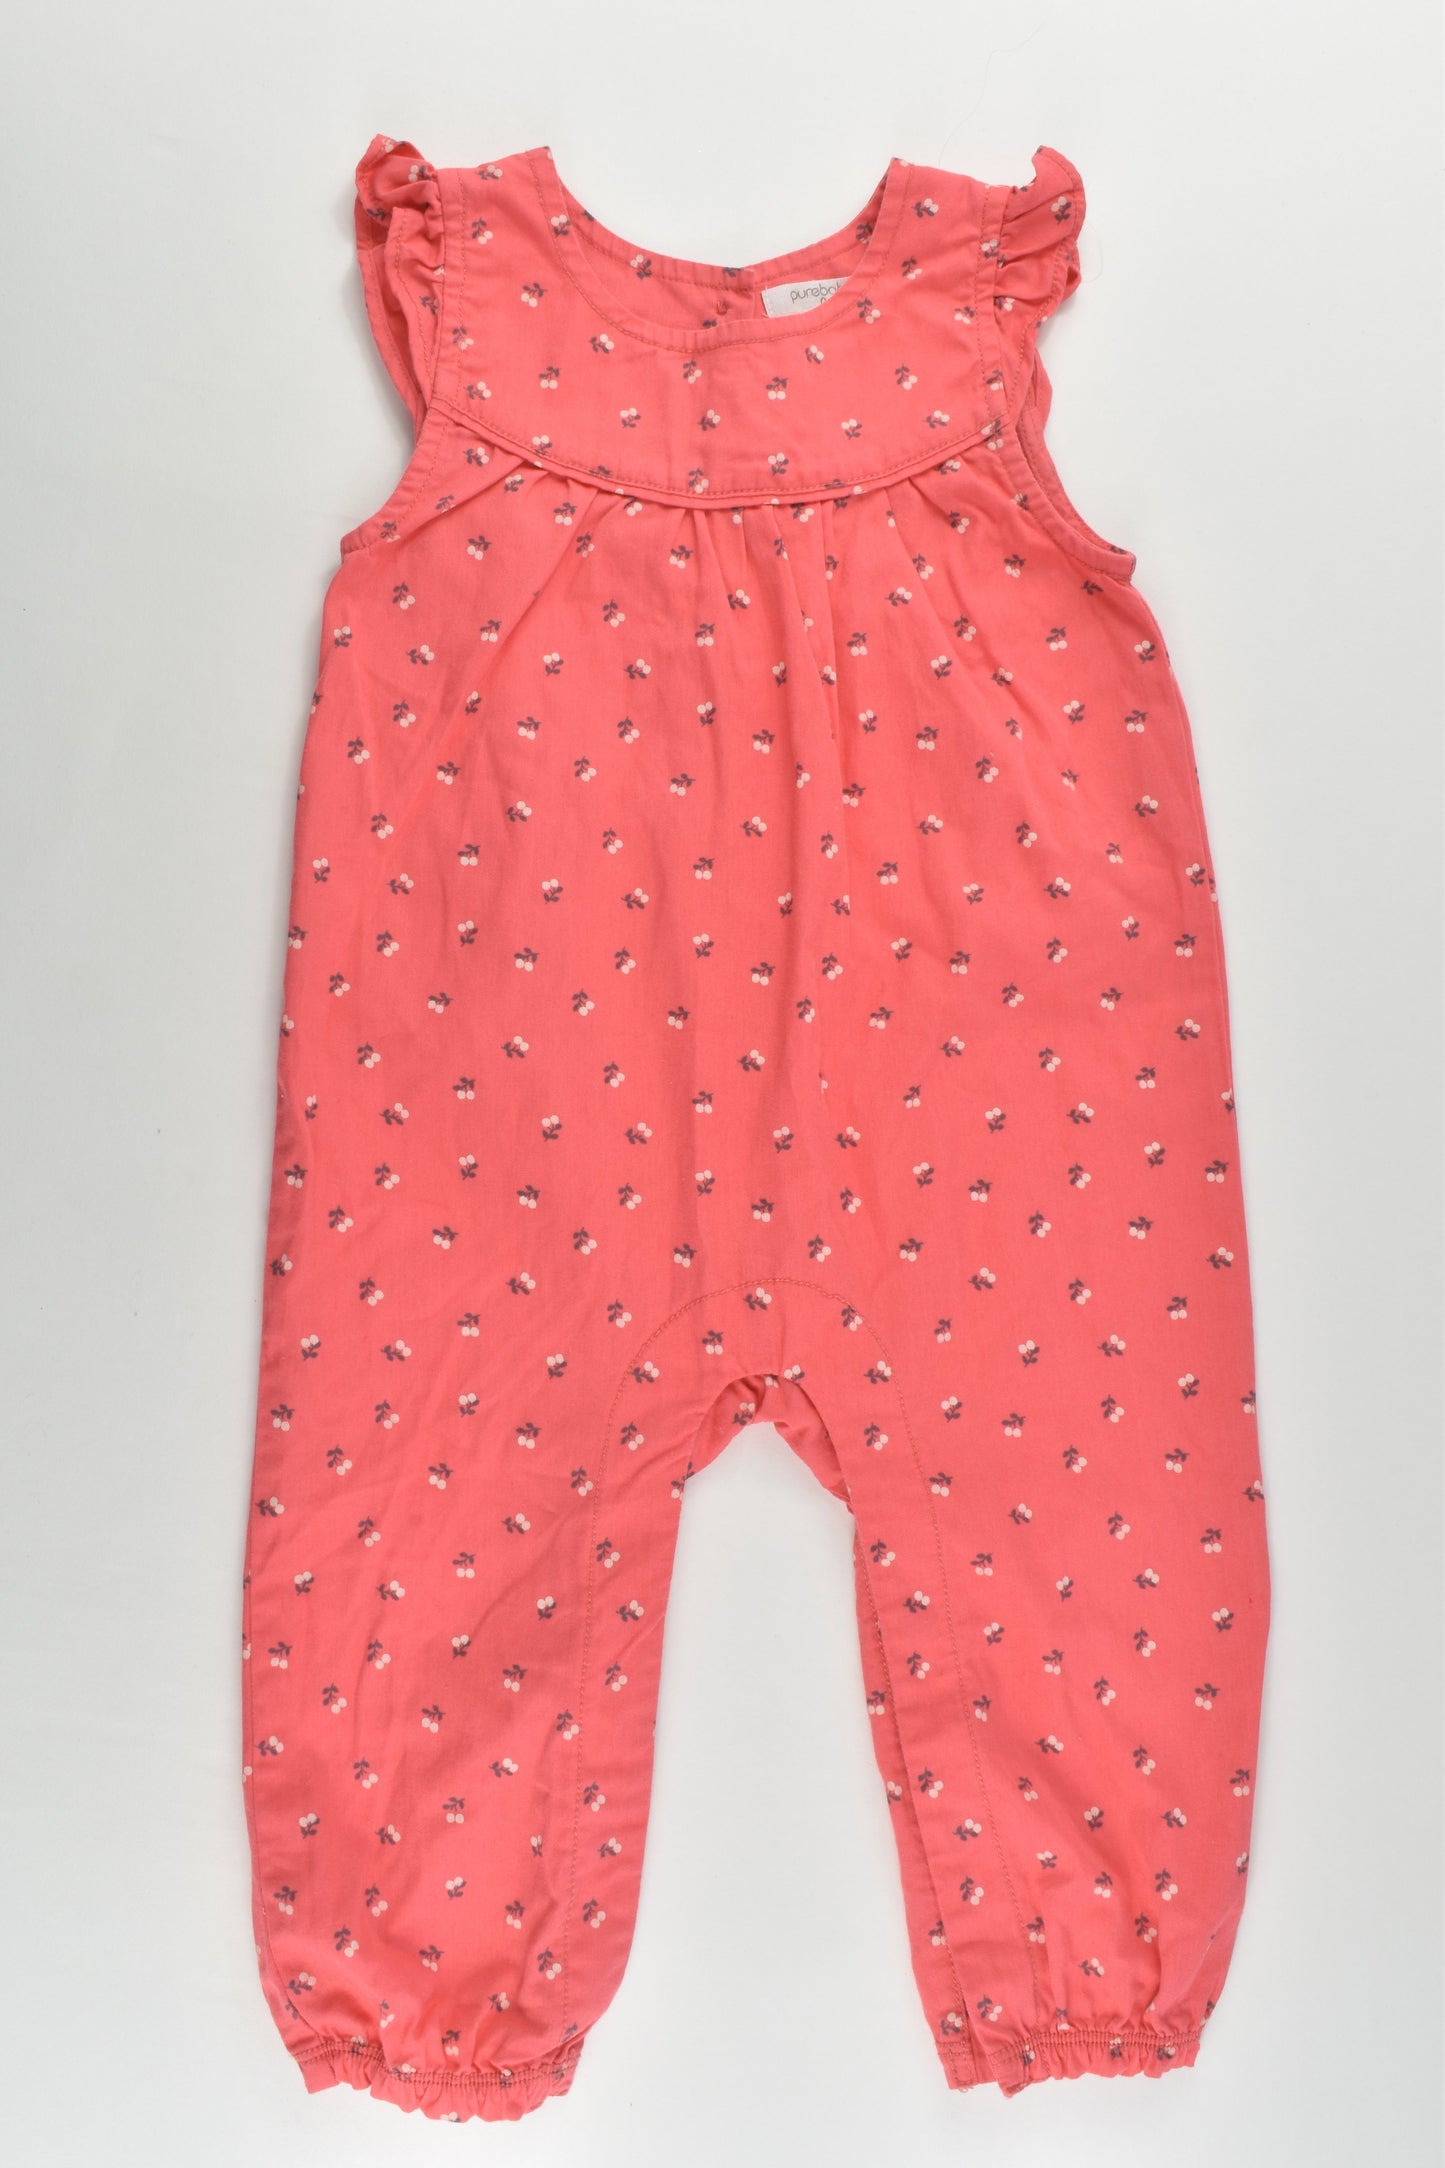 Purebaby Size 0 (6-12 months) Playsuit